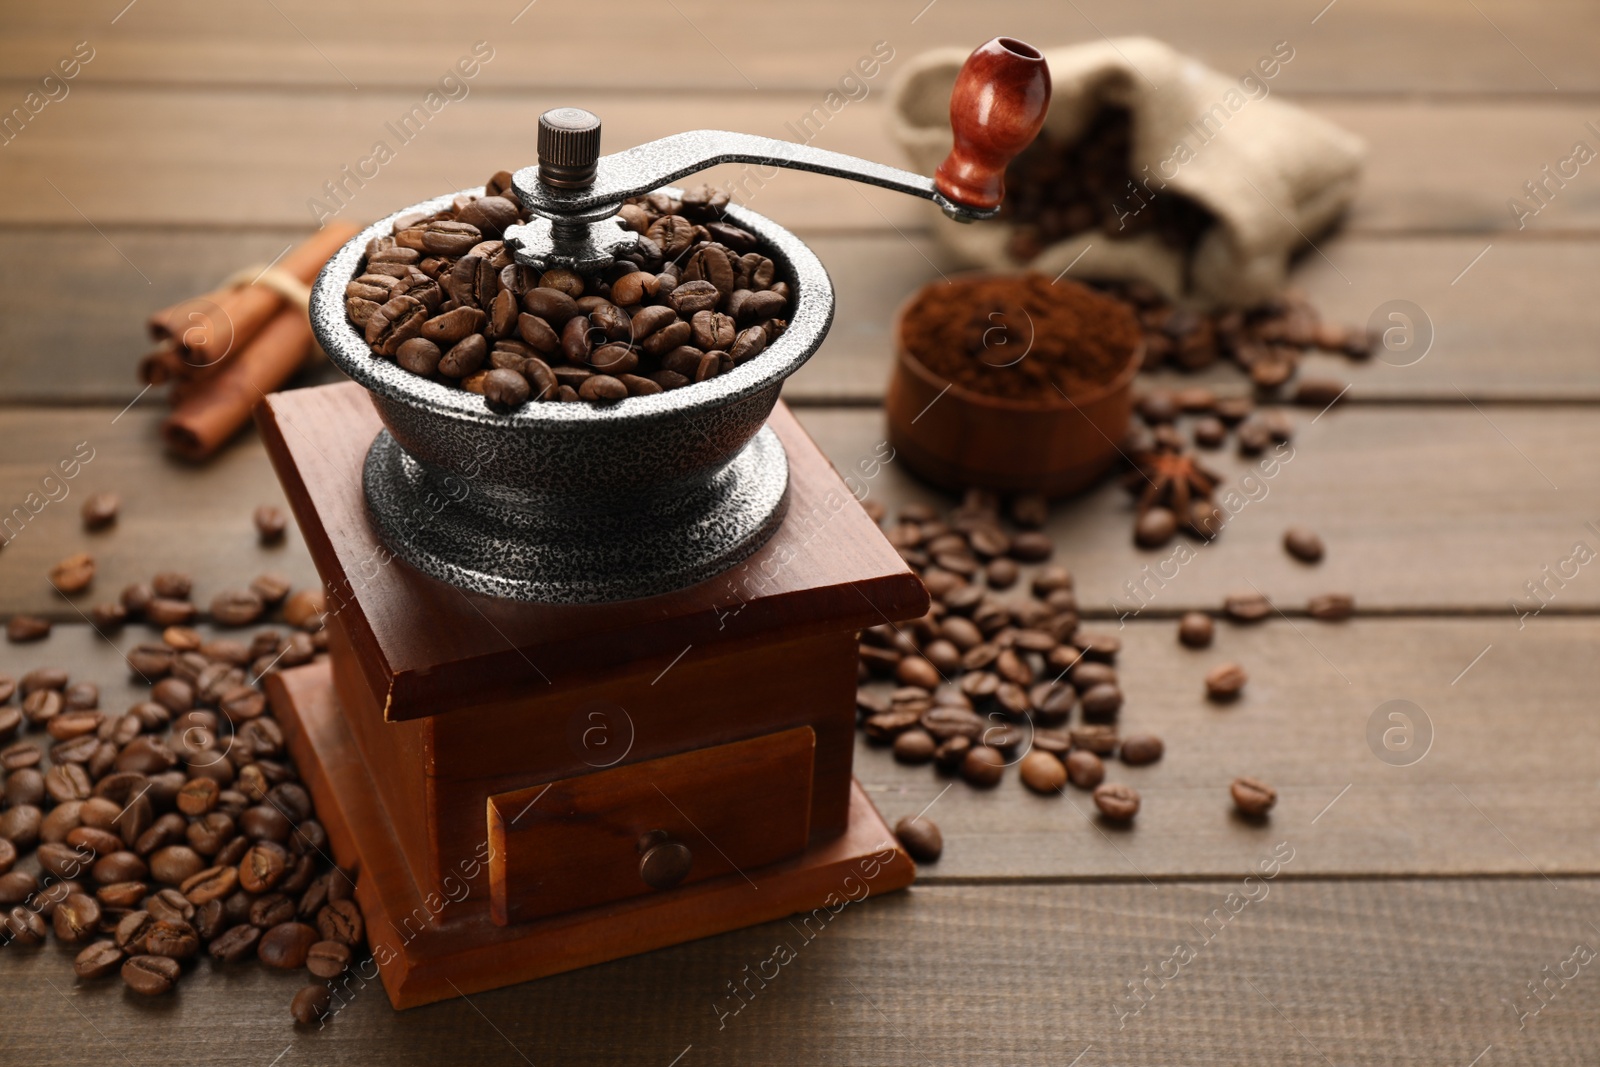 Photo of Vintage manual coffee grinder with beans on wooden table